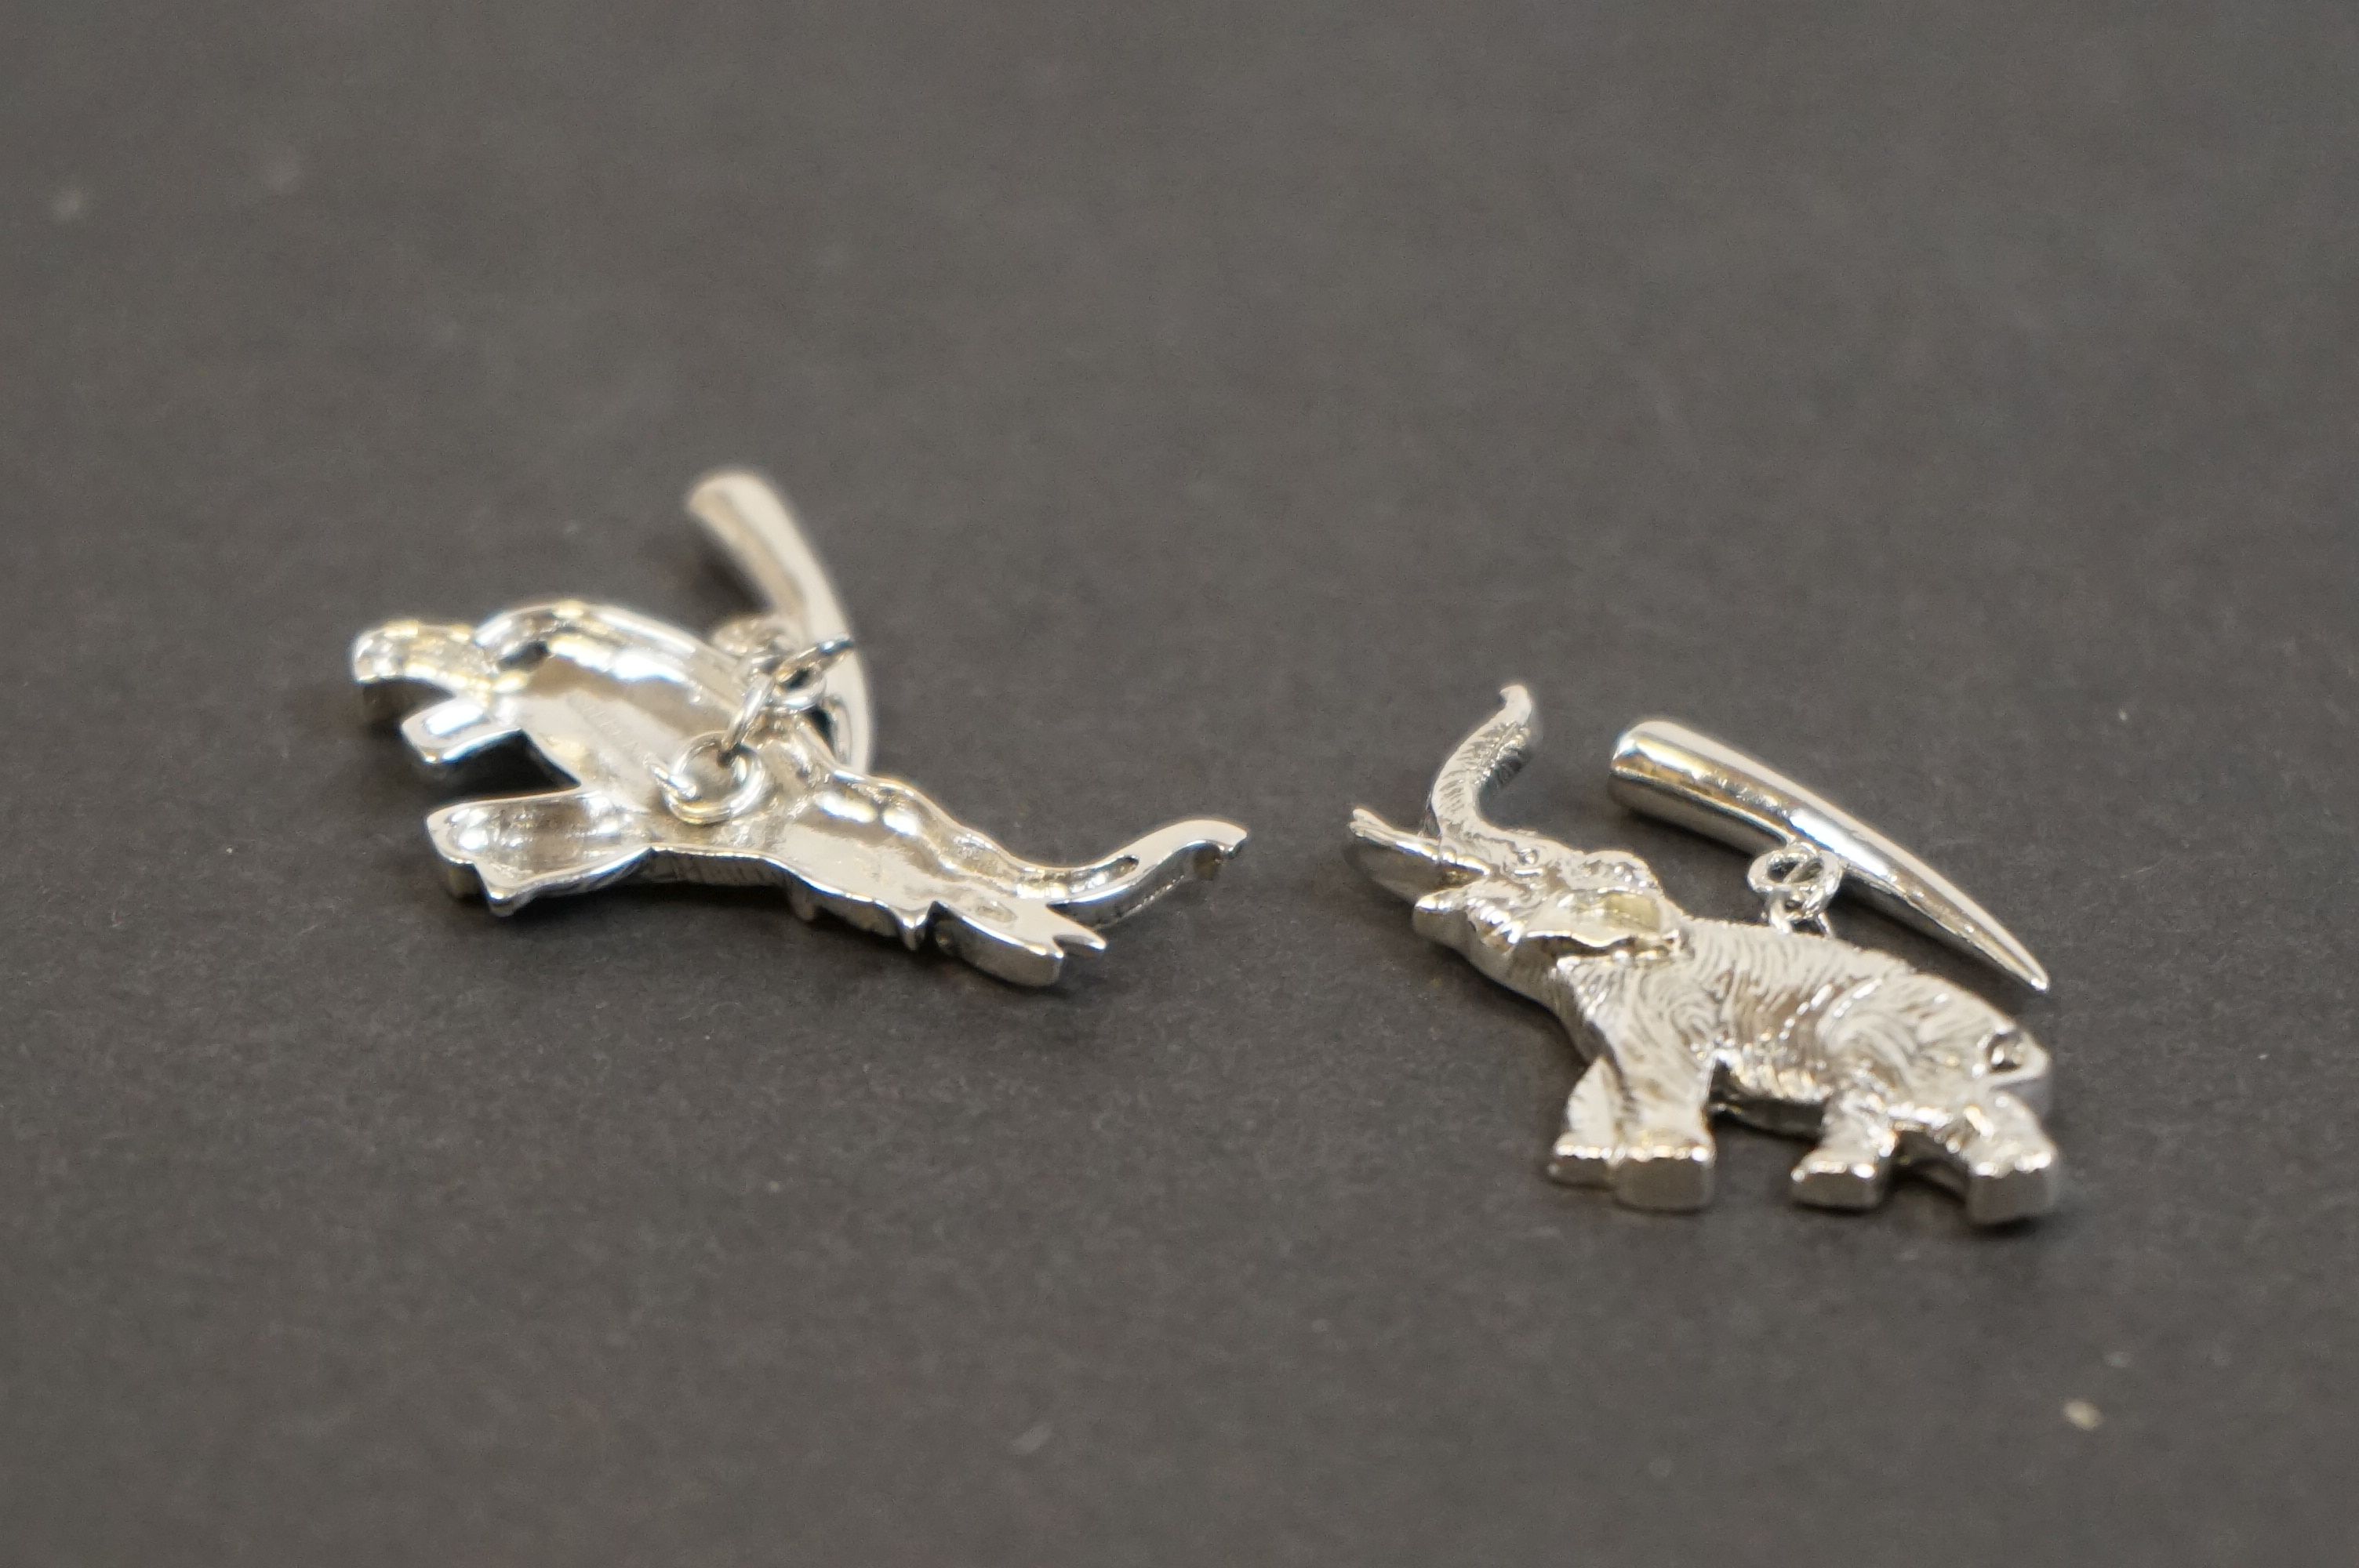 Pair of silver elephant cufflinks - Image 3 of 3